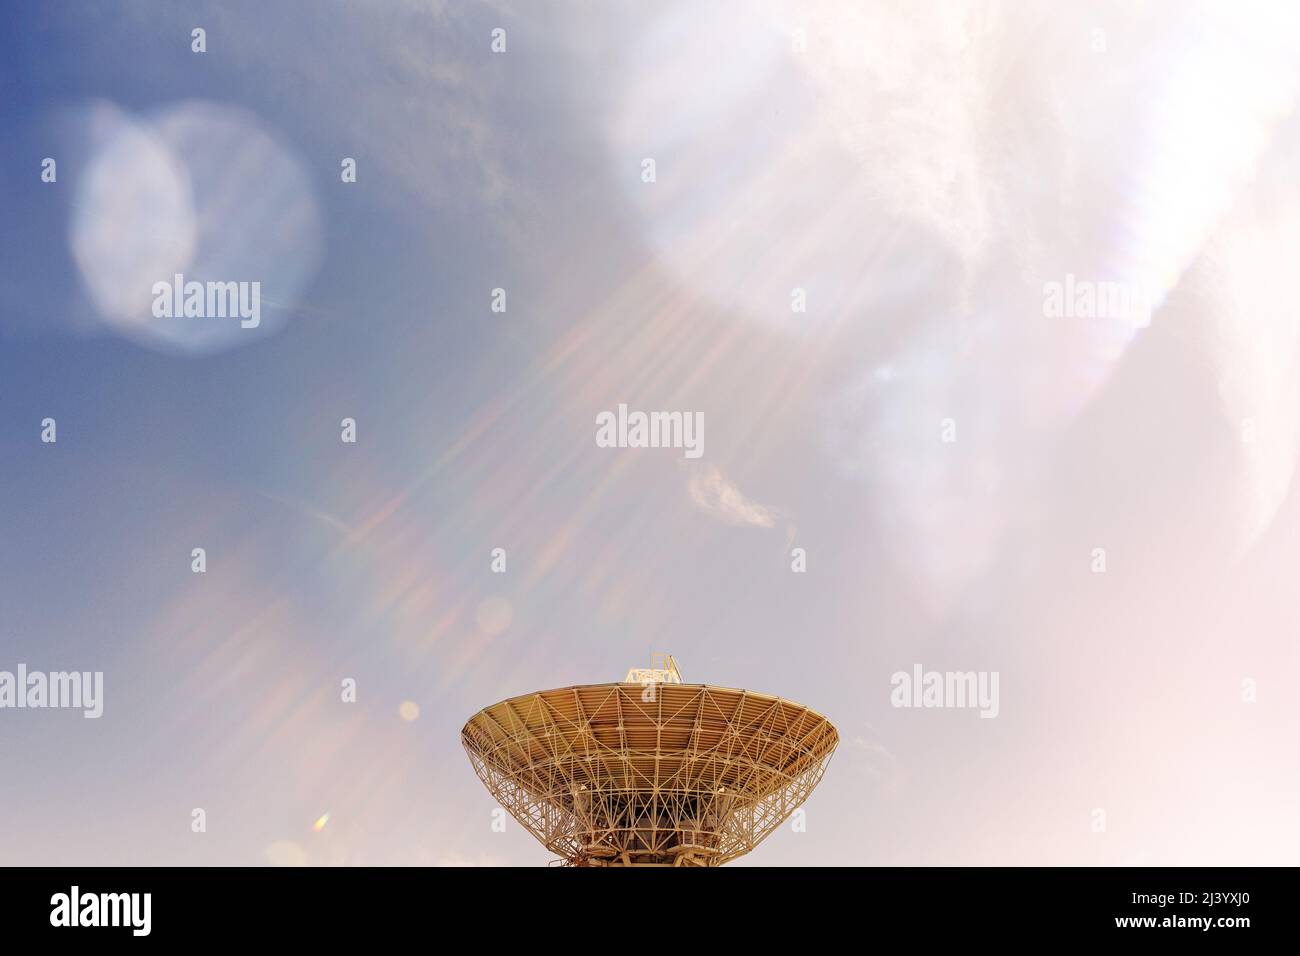 Cosmic Rays Over The Dish Stock Photo